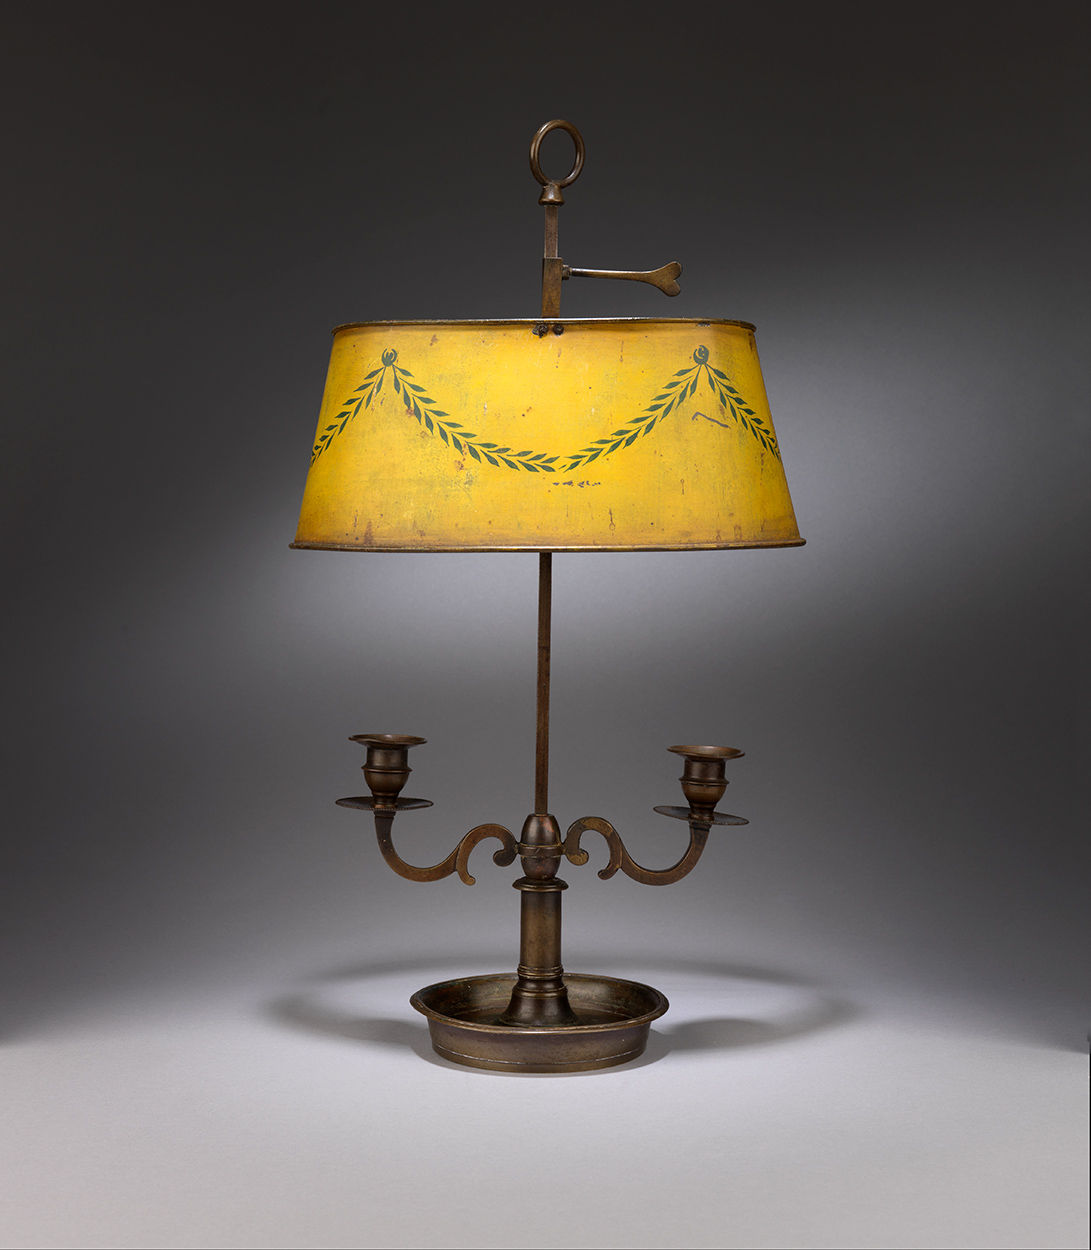 Twin Branch Student Lamp with Original Toleware Shade